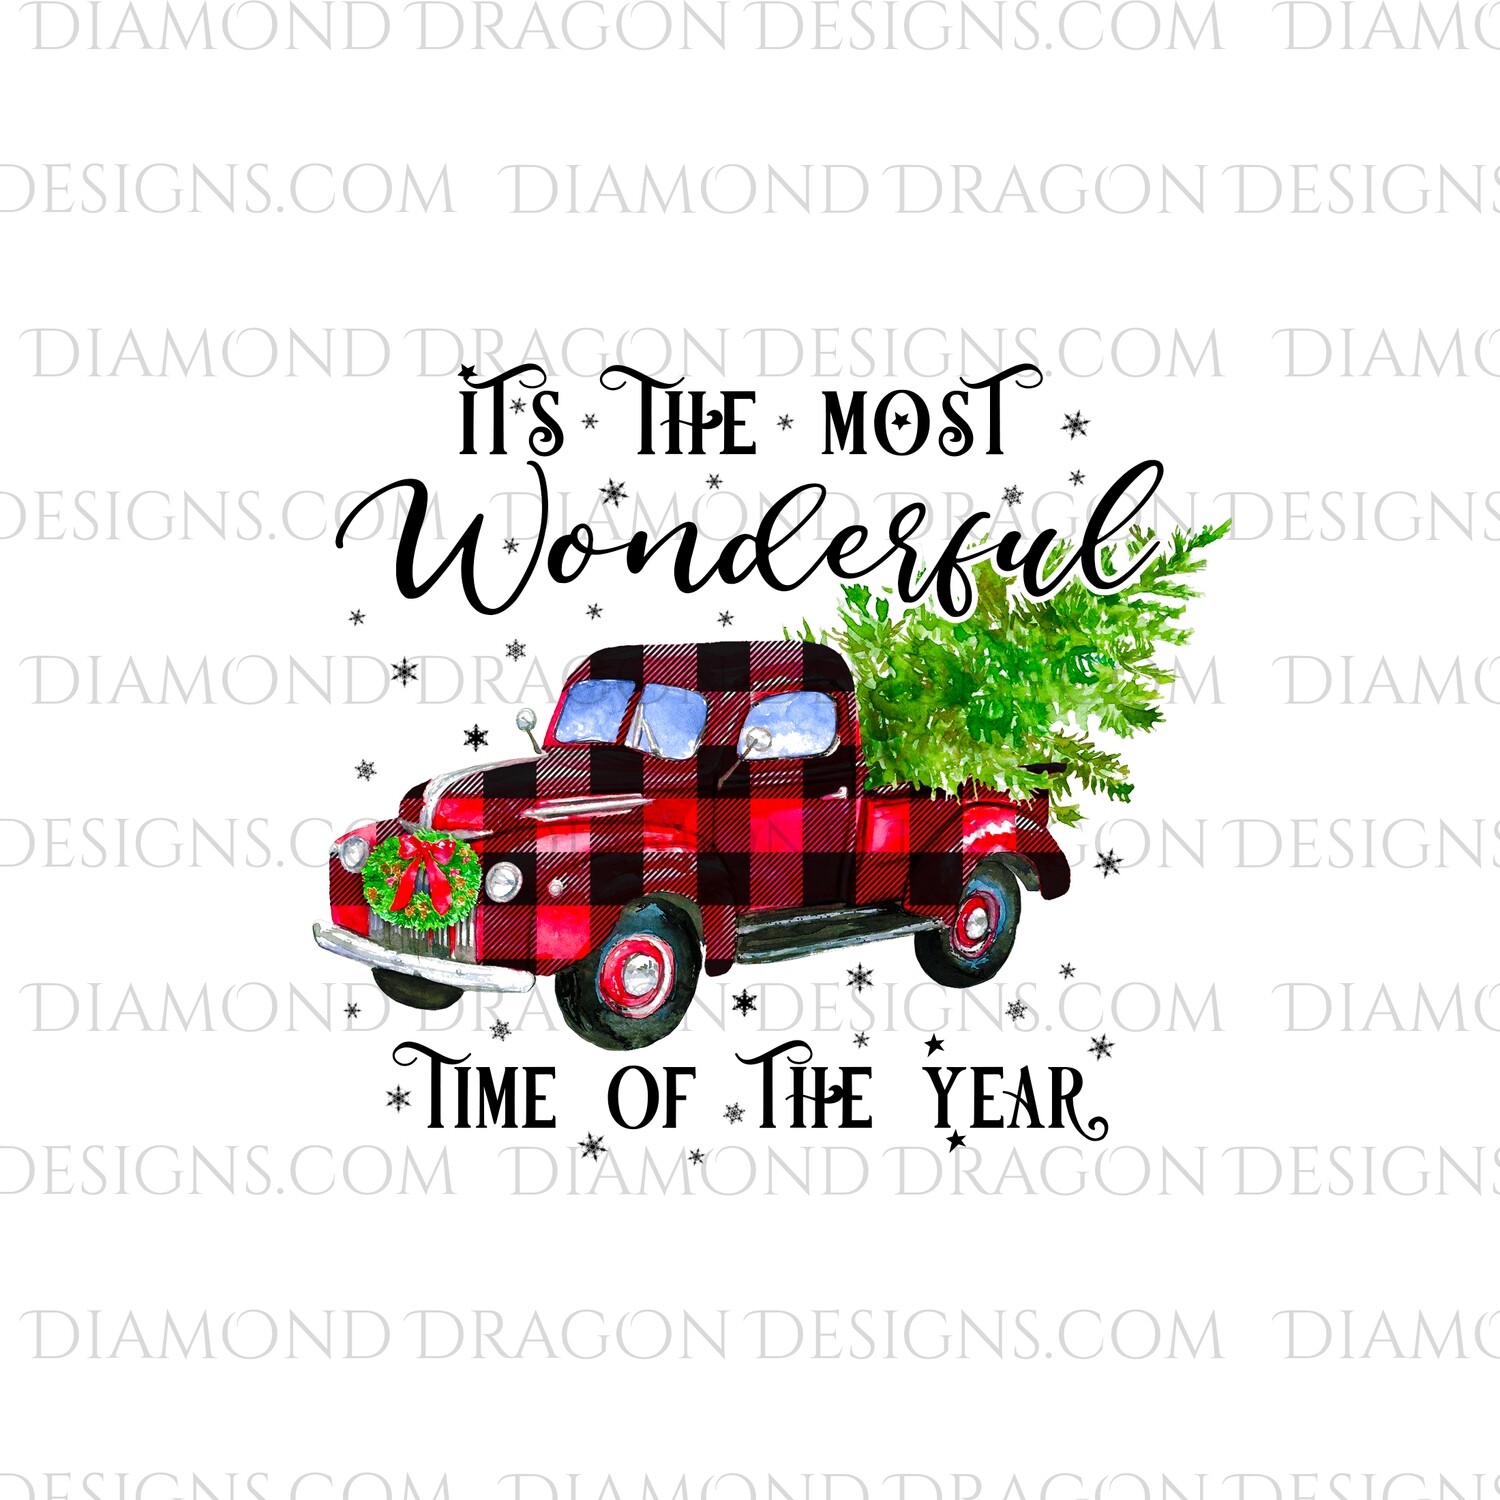 Christmas - Red Plaid Truck, Christmas Tree, It’s the most wonderful time, Red Vintage Truck 2, Digital Image